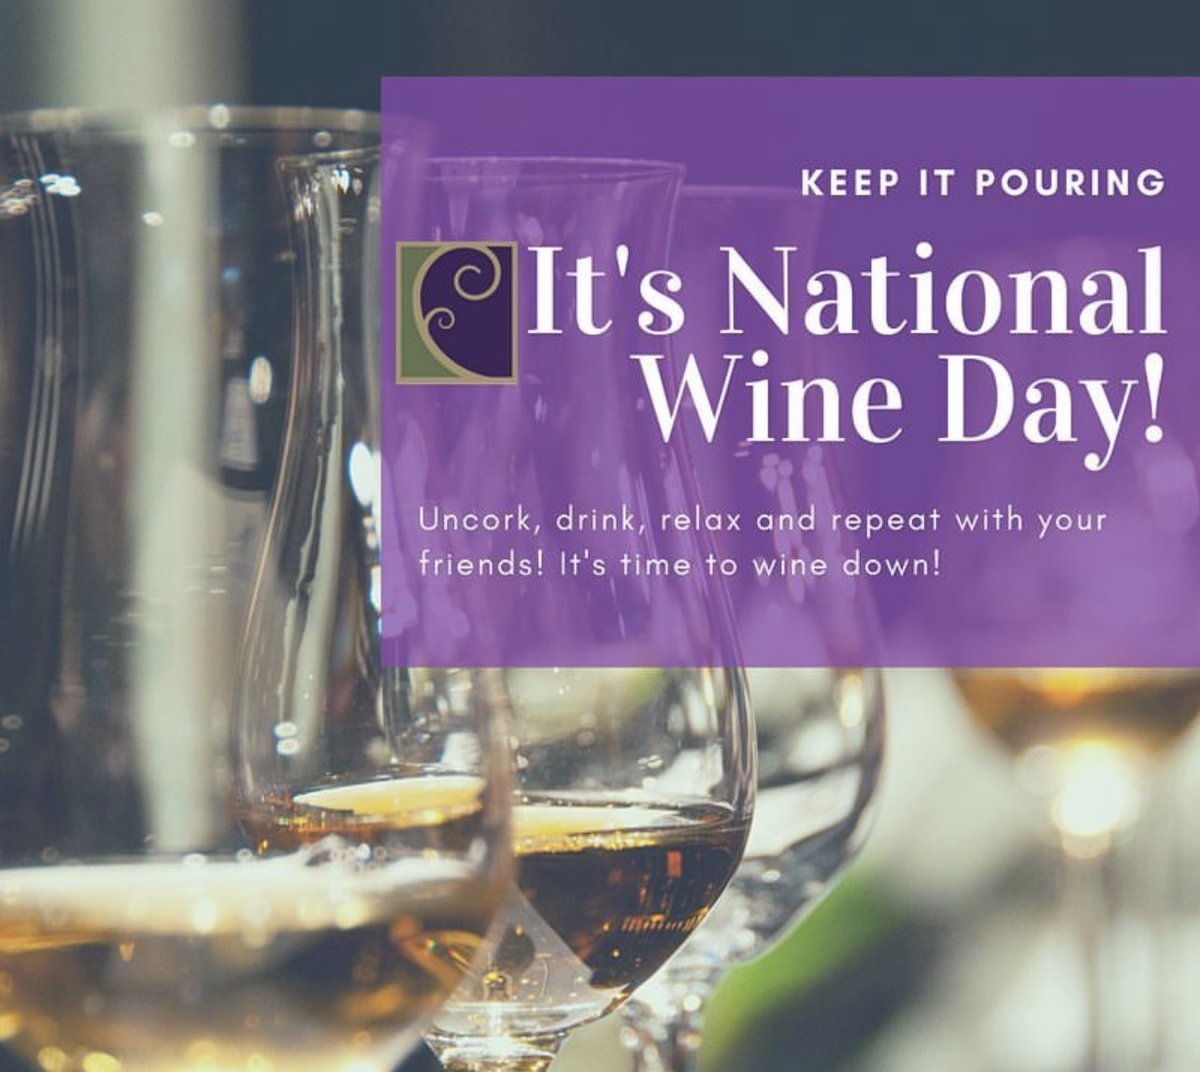 Happy National Wine Day! Let us make this day a memorable one with a generous glass of your favorite Fiddlehead Wine!  Cheers! 🍷

#fiddleheadcellars #letsdrinkwine #happynationalwineday